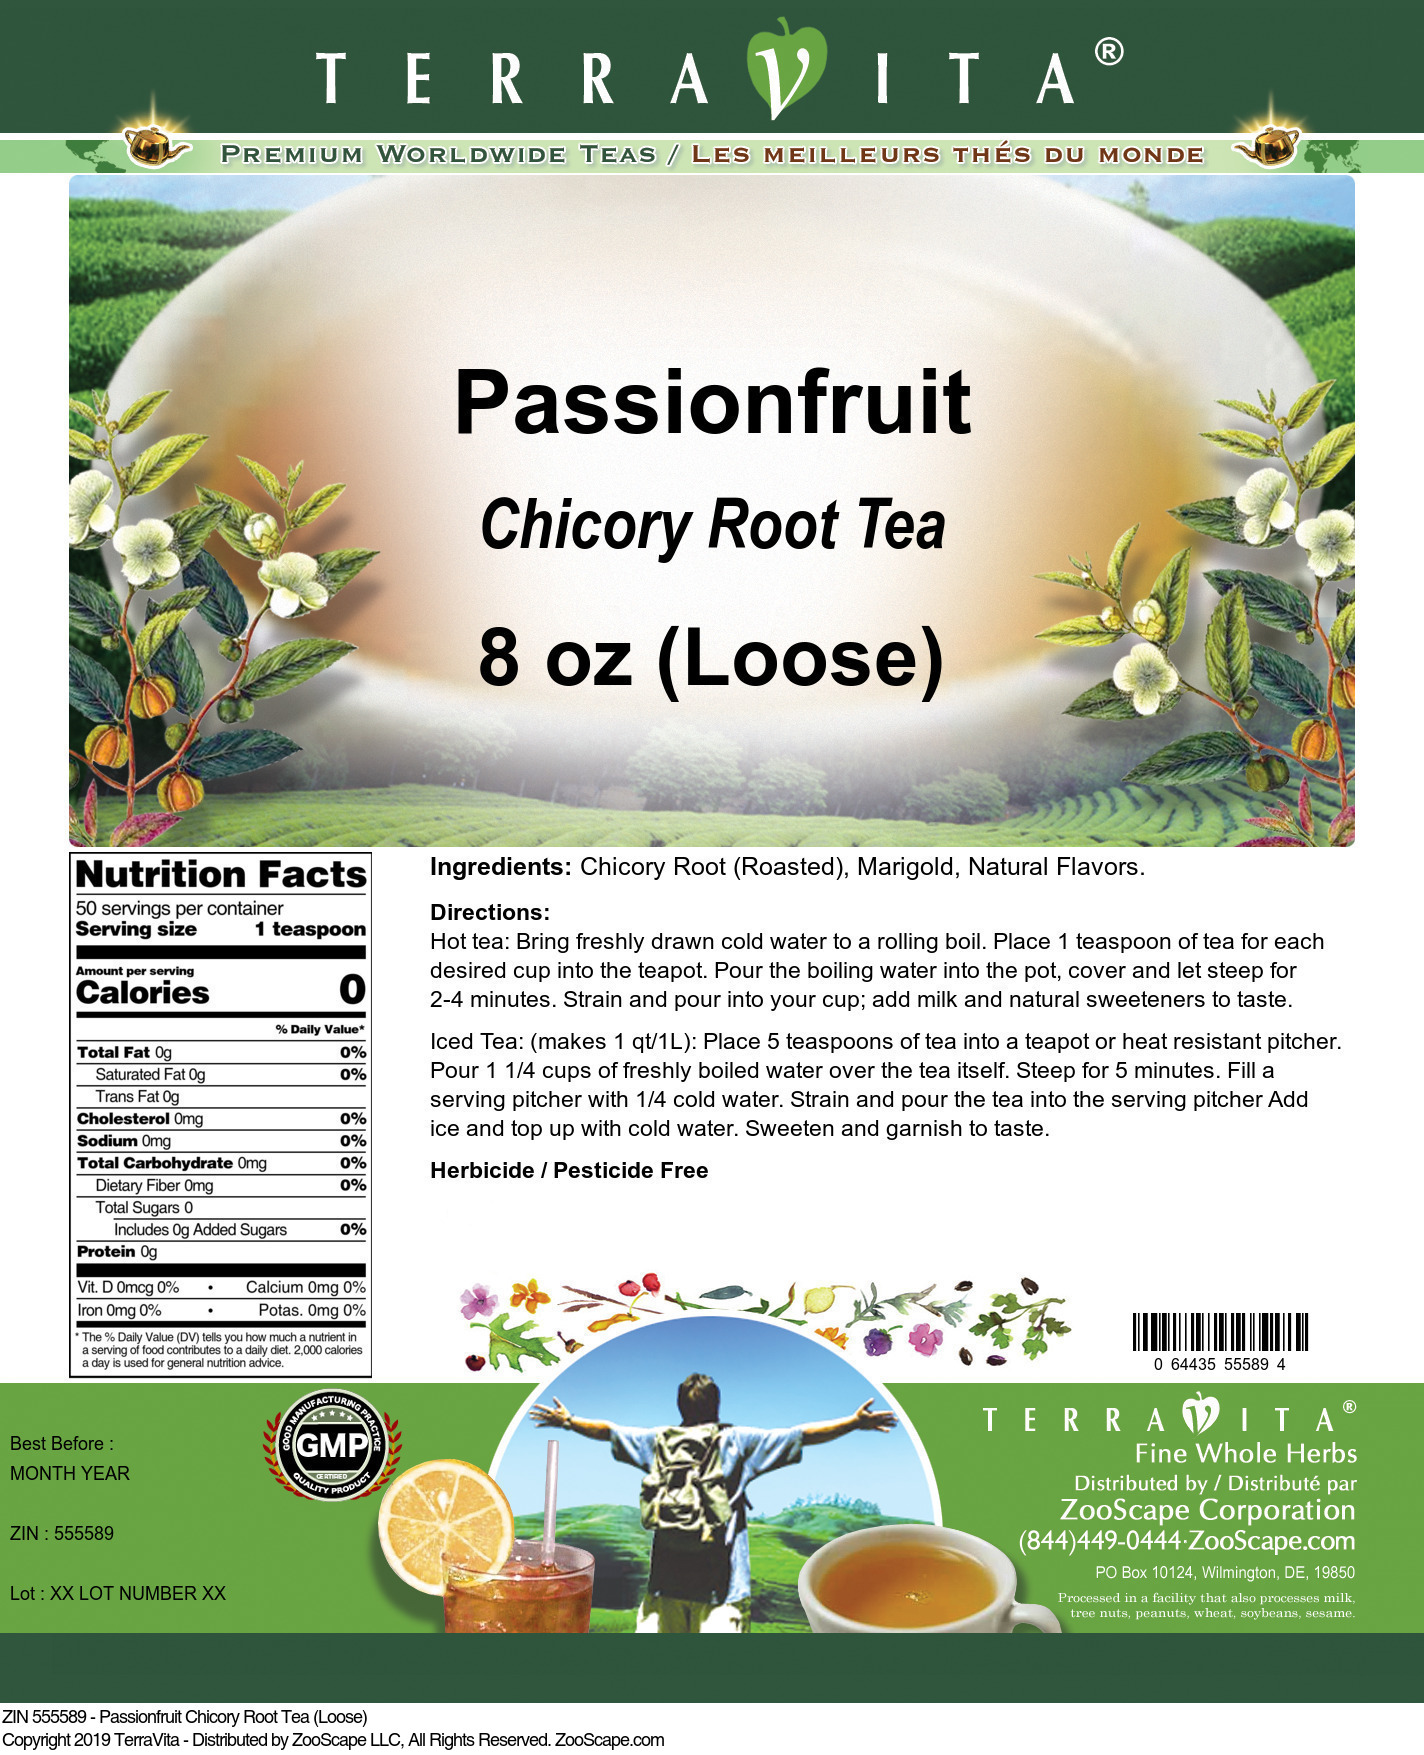 Passionfruit Chicory Root Tea (Loose) - Label